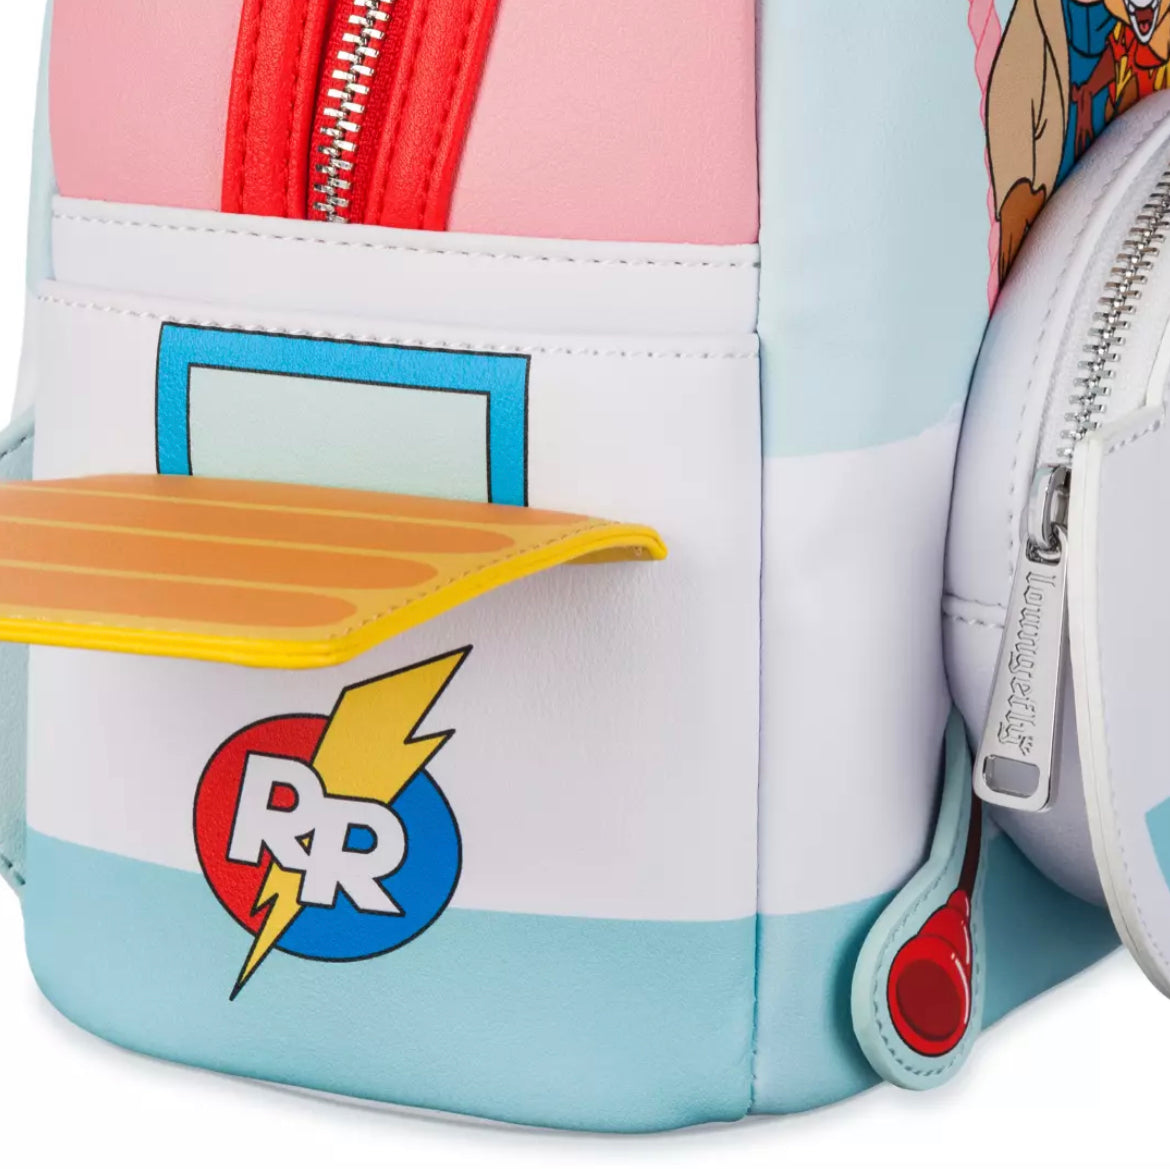 Loungefly Disney 100 Chip 'n Dale's Rescue Rangers Mini Backpack